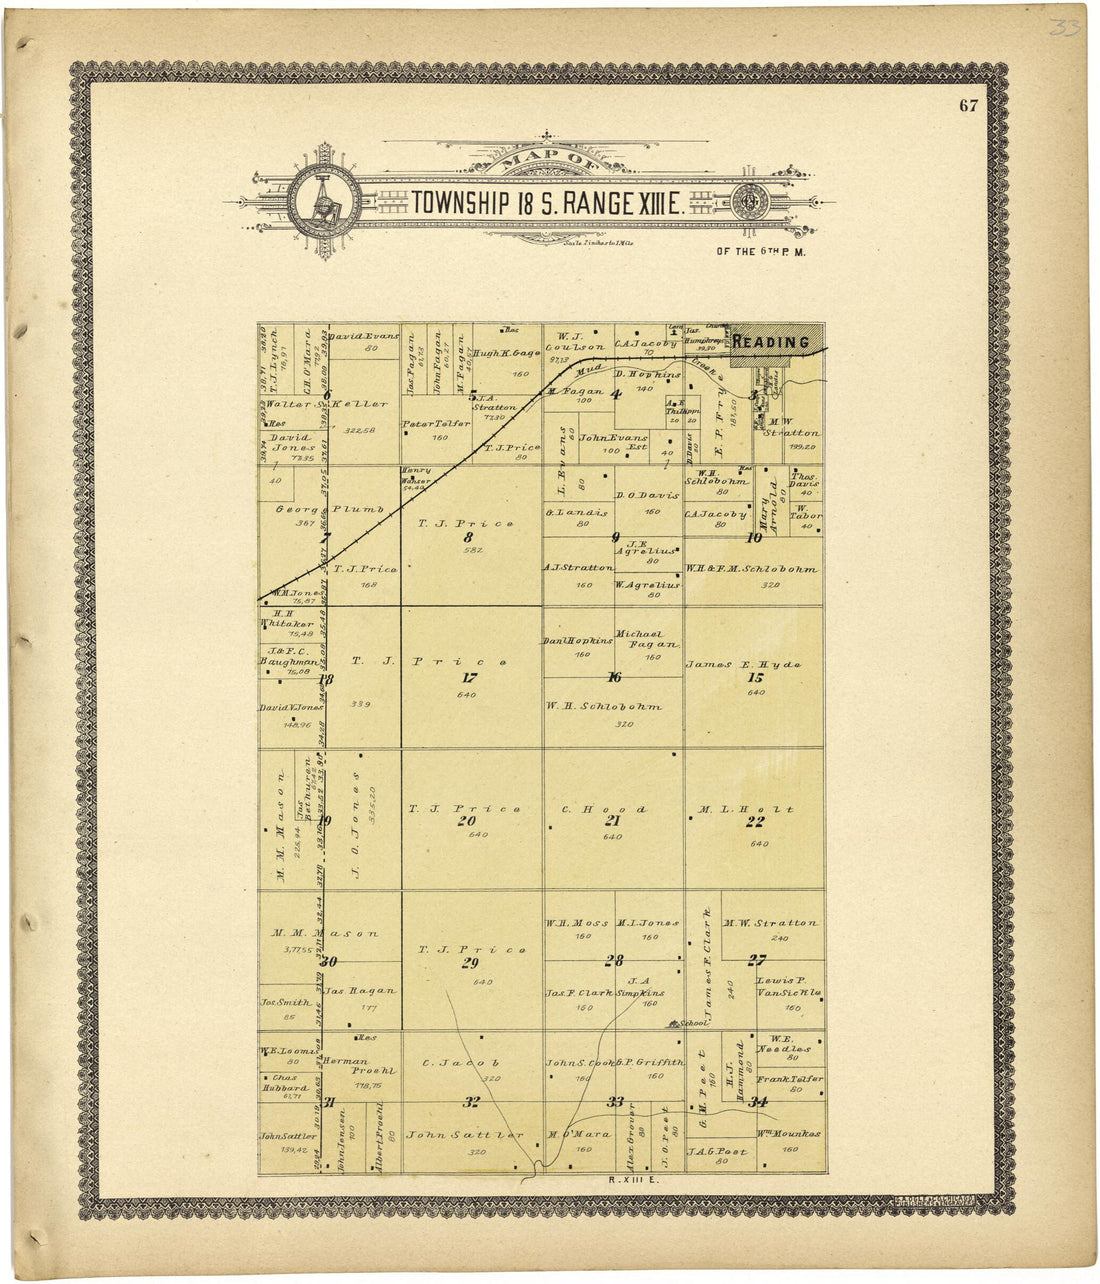 This old map of Map of Township 18 S. Range XIII E. from Standard Atlas of Lyon County, Kansas from 1901 was created by  Geo. A. Ogle &amp; Co in 1901